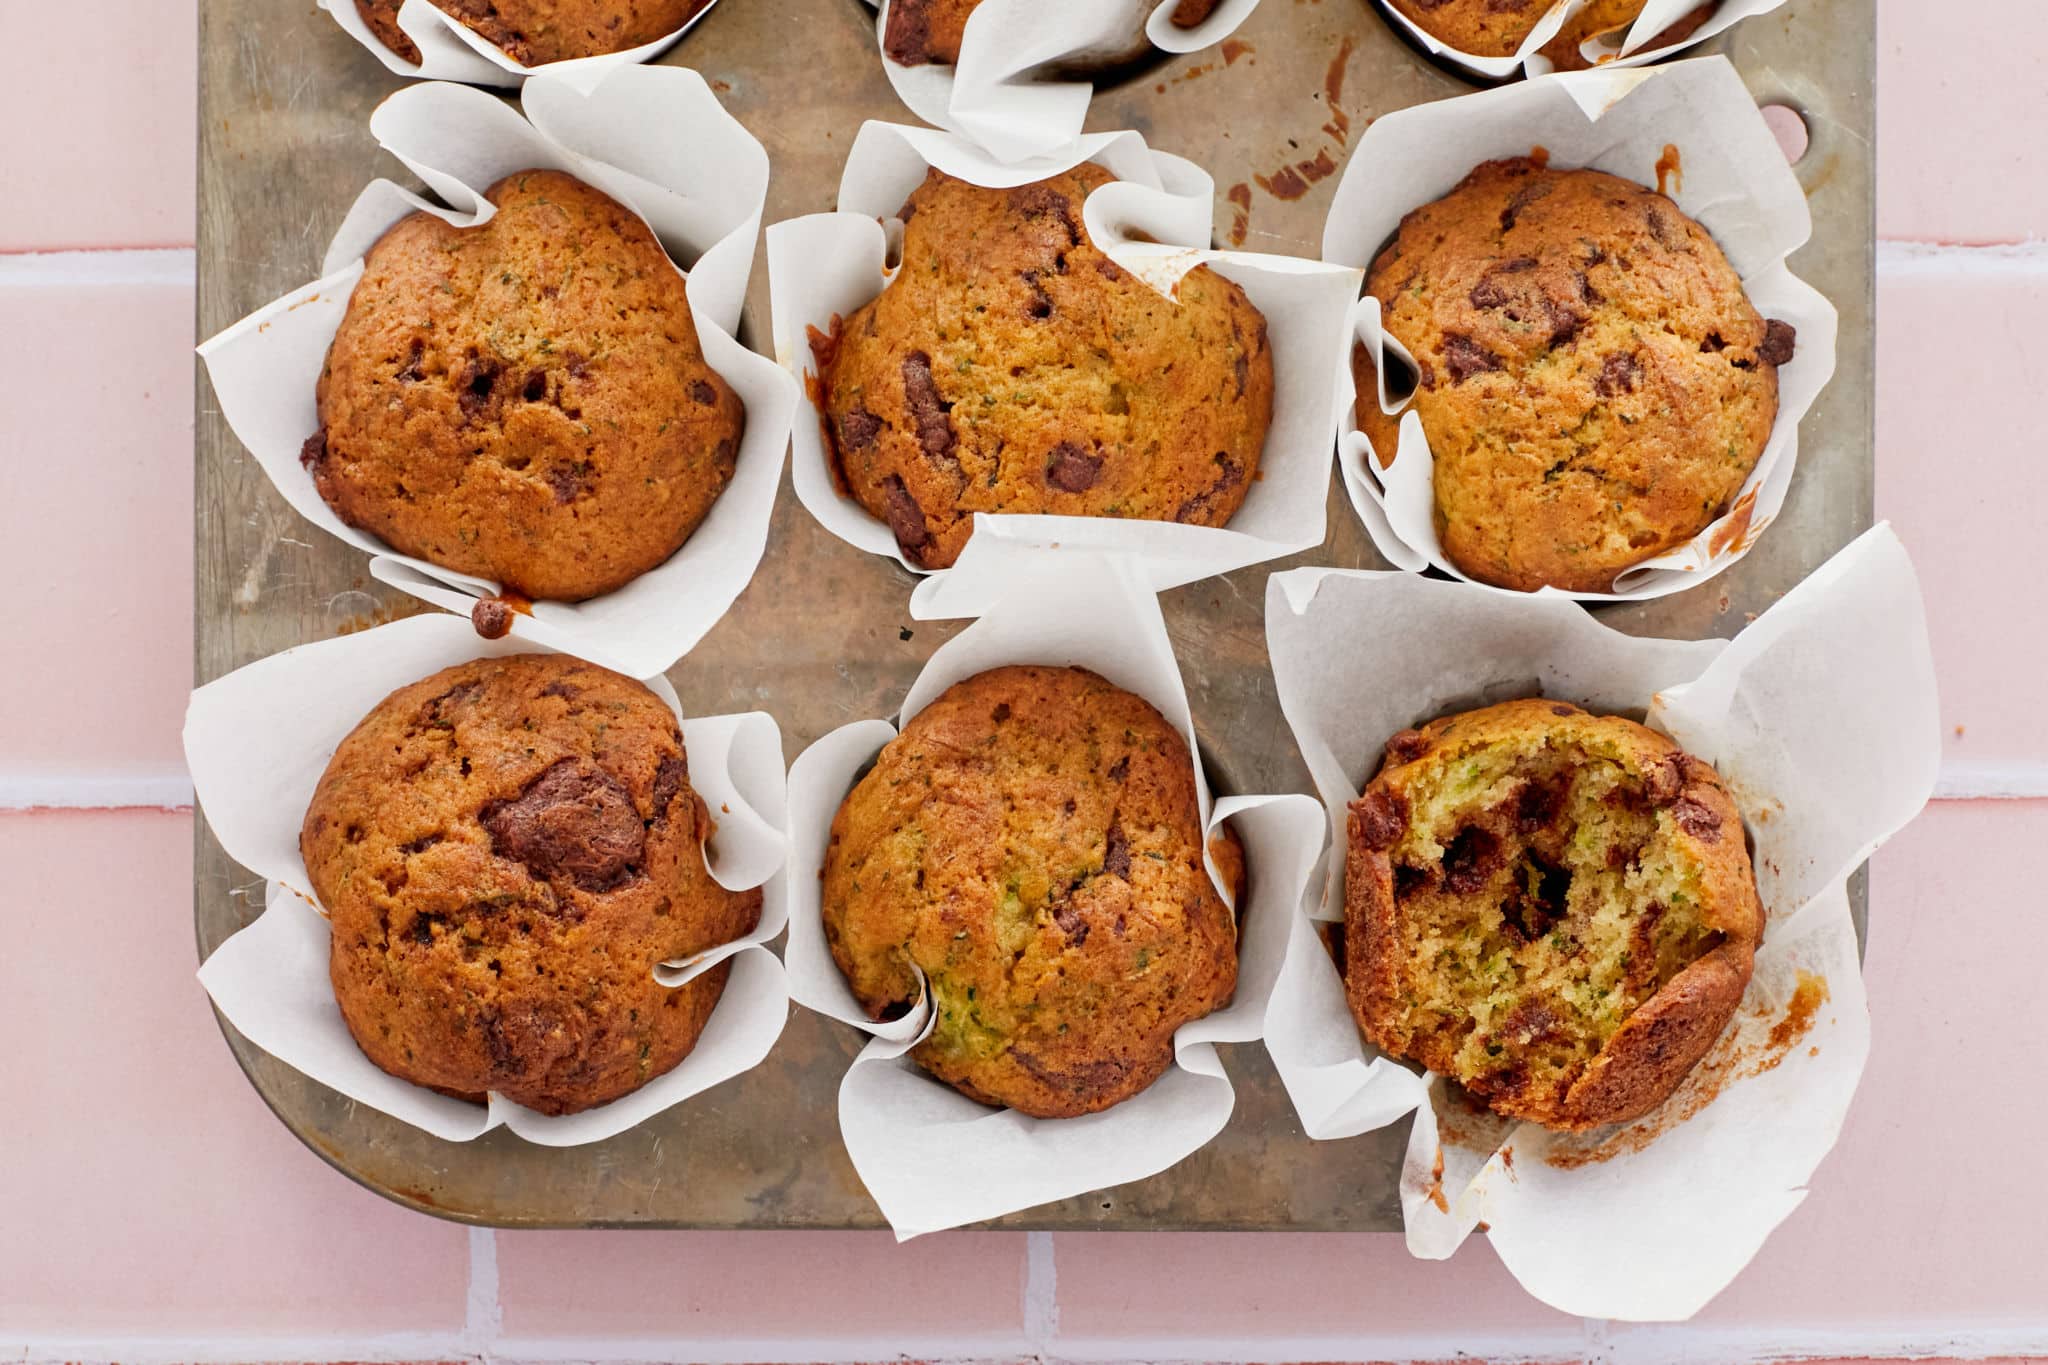 Homemade Zucchini Chocolate Chip Muffins rest in a cupcake pan using parchment paper instead of cupcake wrappers.